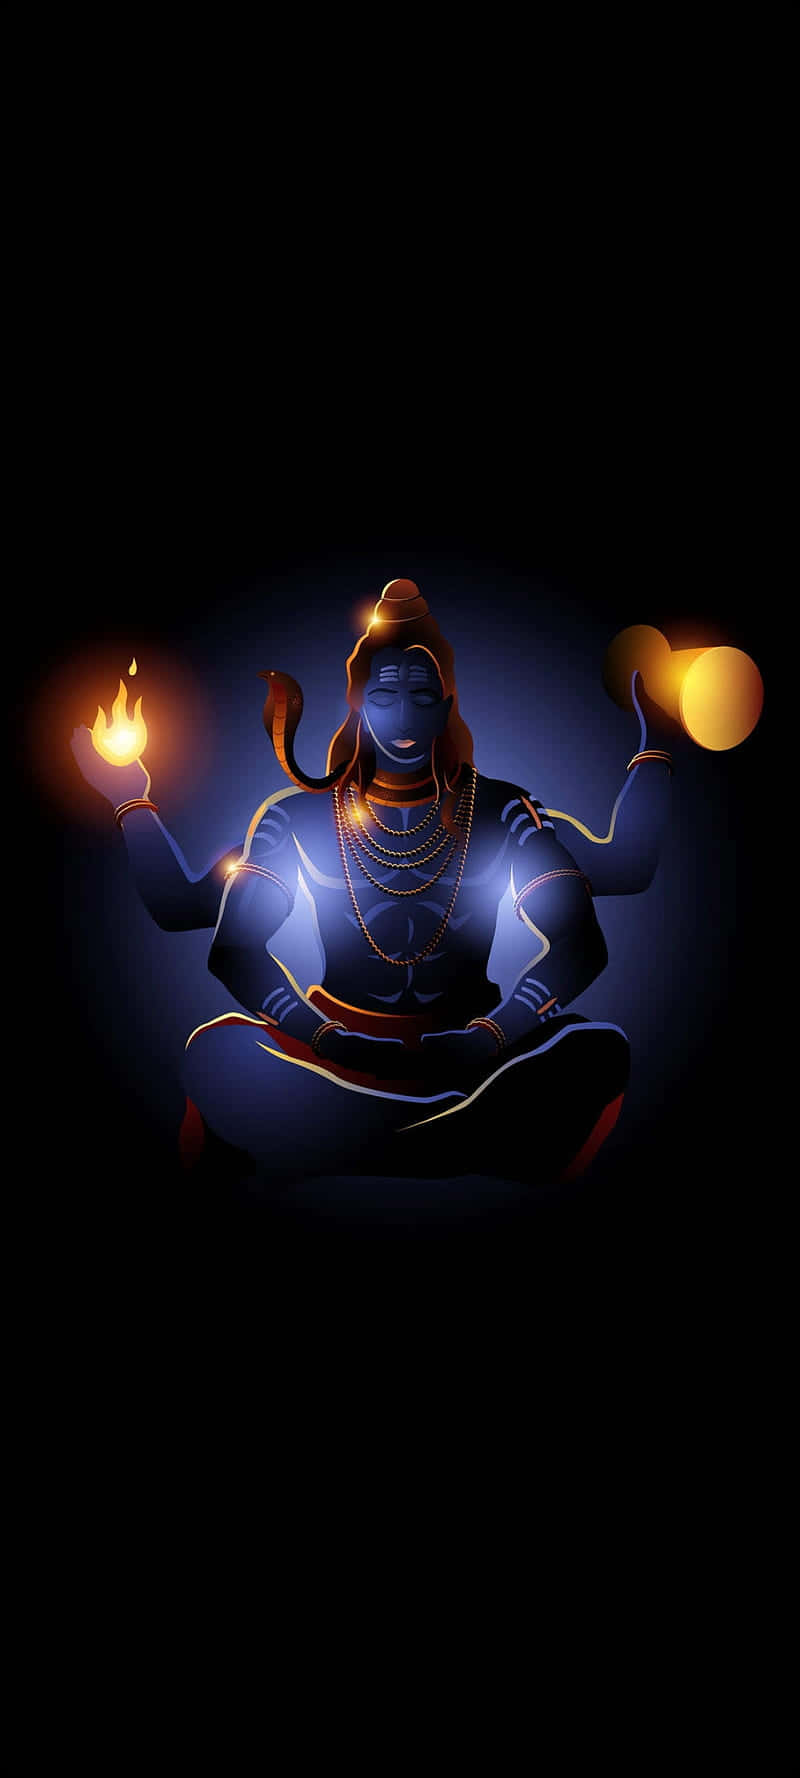 Tranquil Depiction Of Lord Shiva Wallpaper